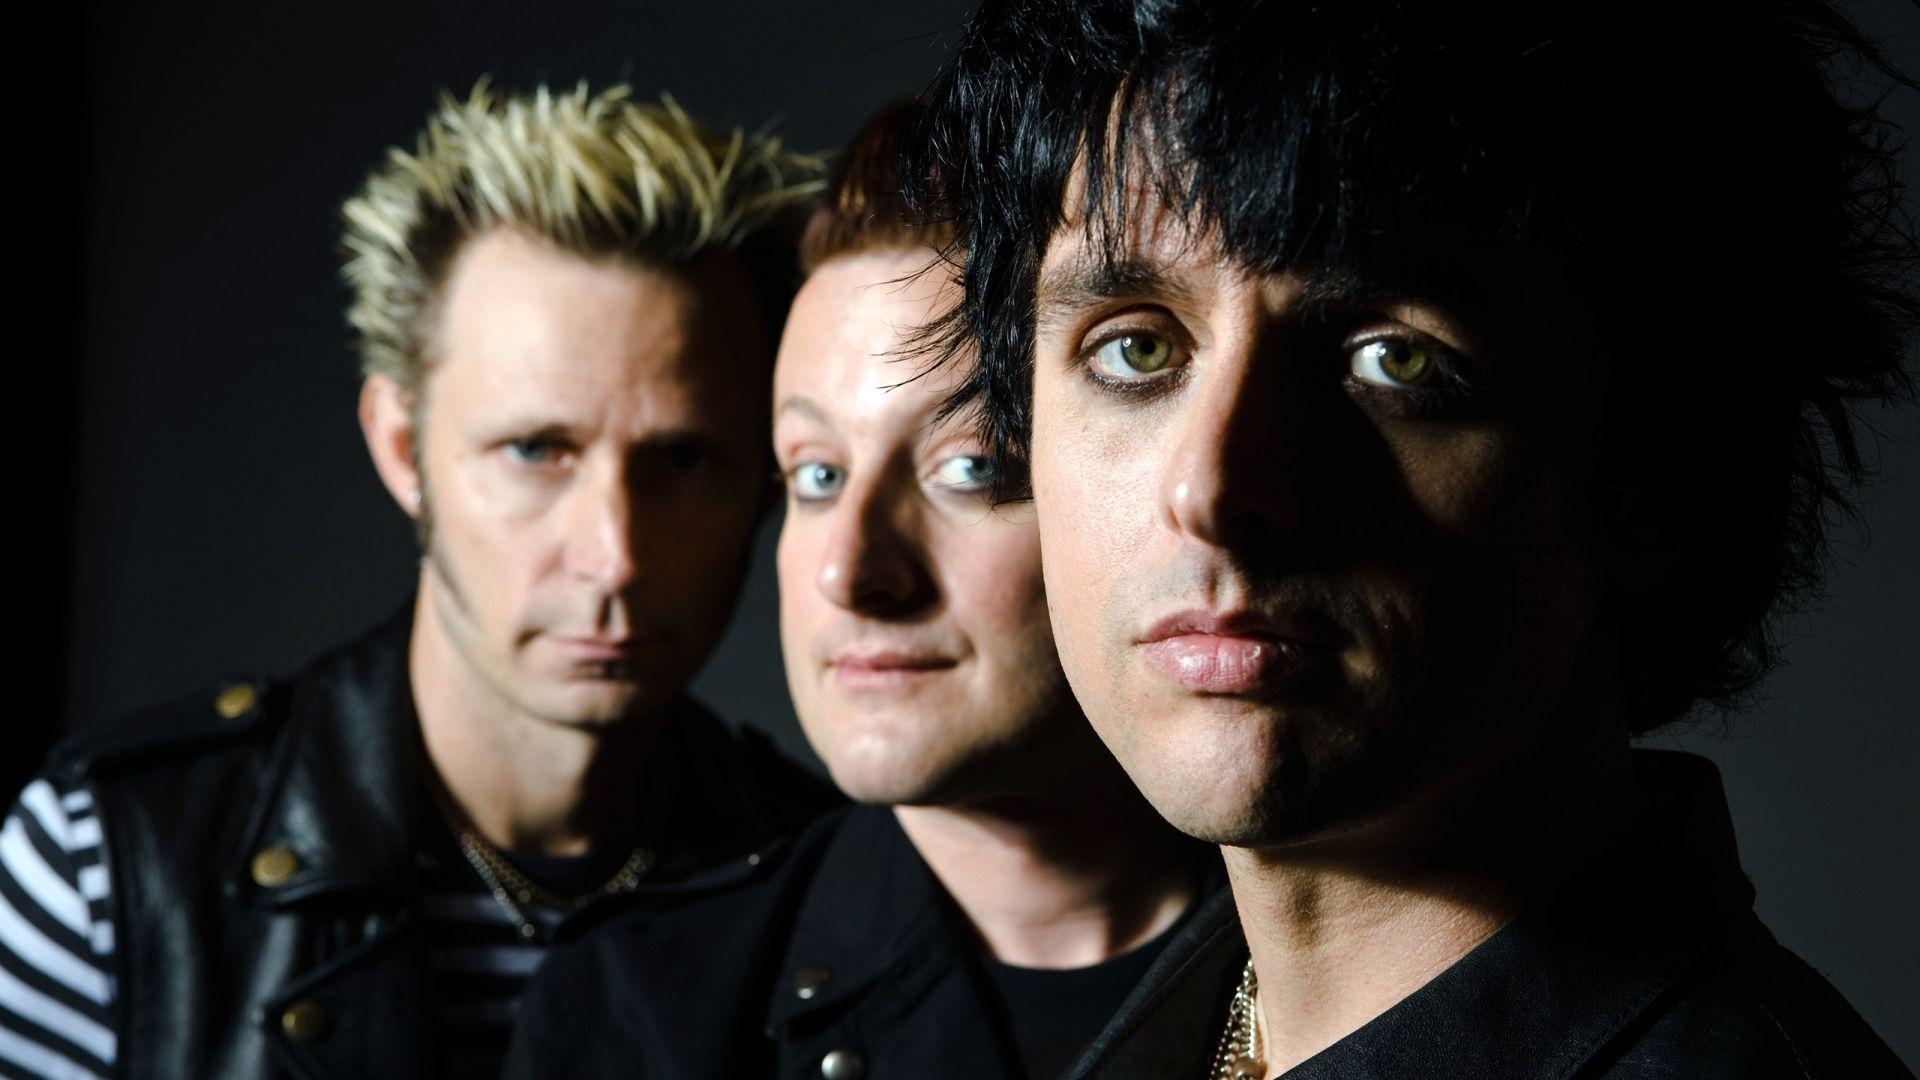 Green Day Band Look Wallpapers 1920x1080 px Free Download